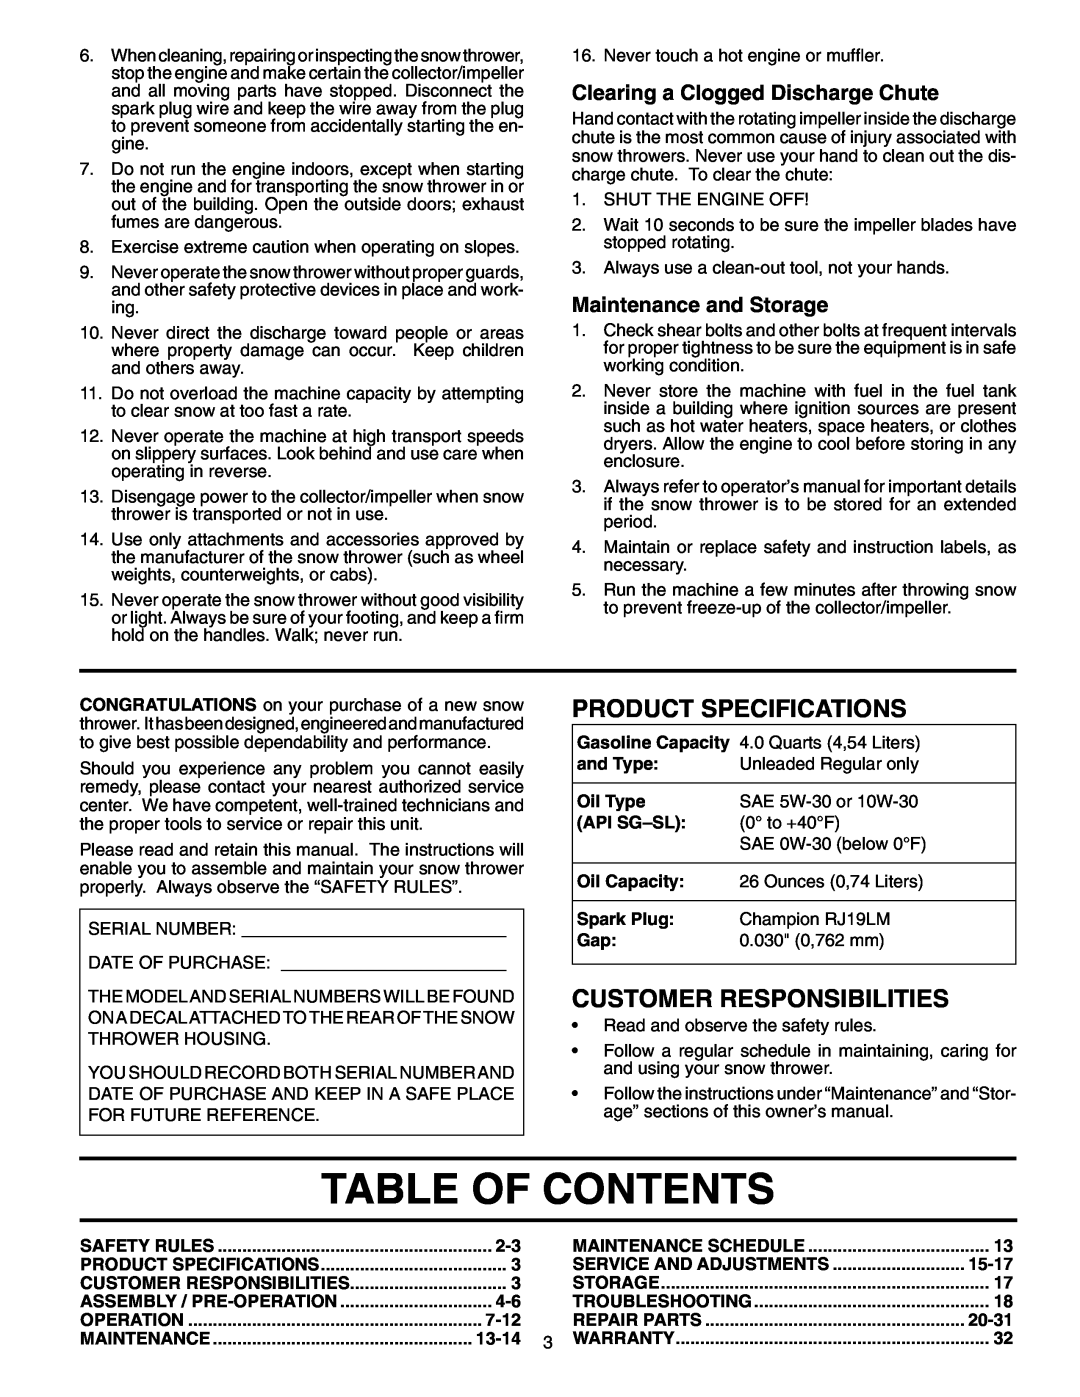 Poulan 401214 Table Of Contents, Clearing a Clogged Discharge Chute, Maintenance and Storage, Product Specifications, 7-12 